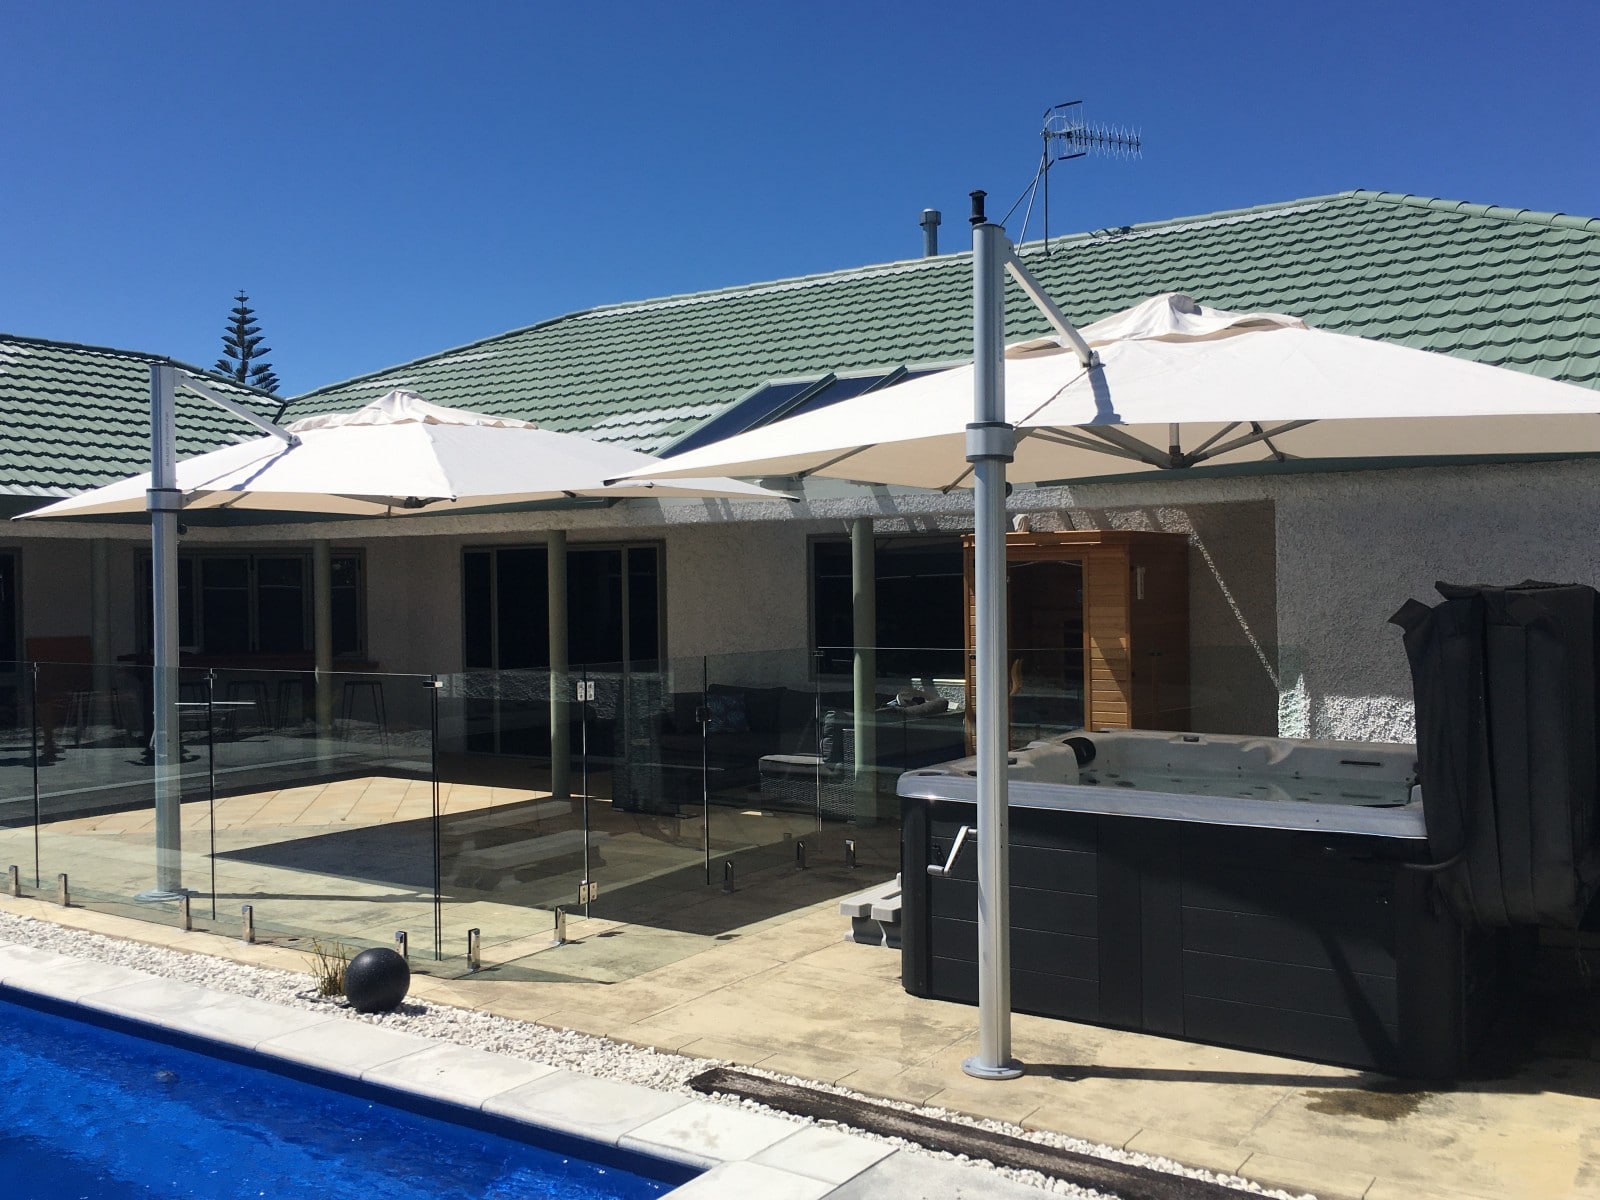 Shade7 outdoor umbrella provides shade for poolside haven in Hawkes Bay